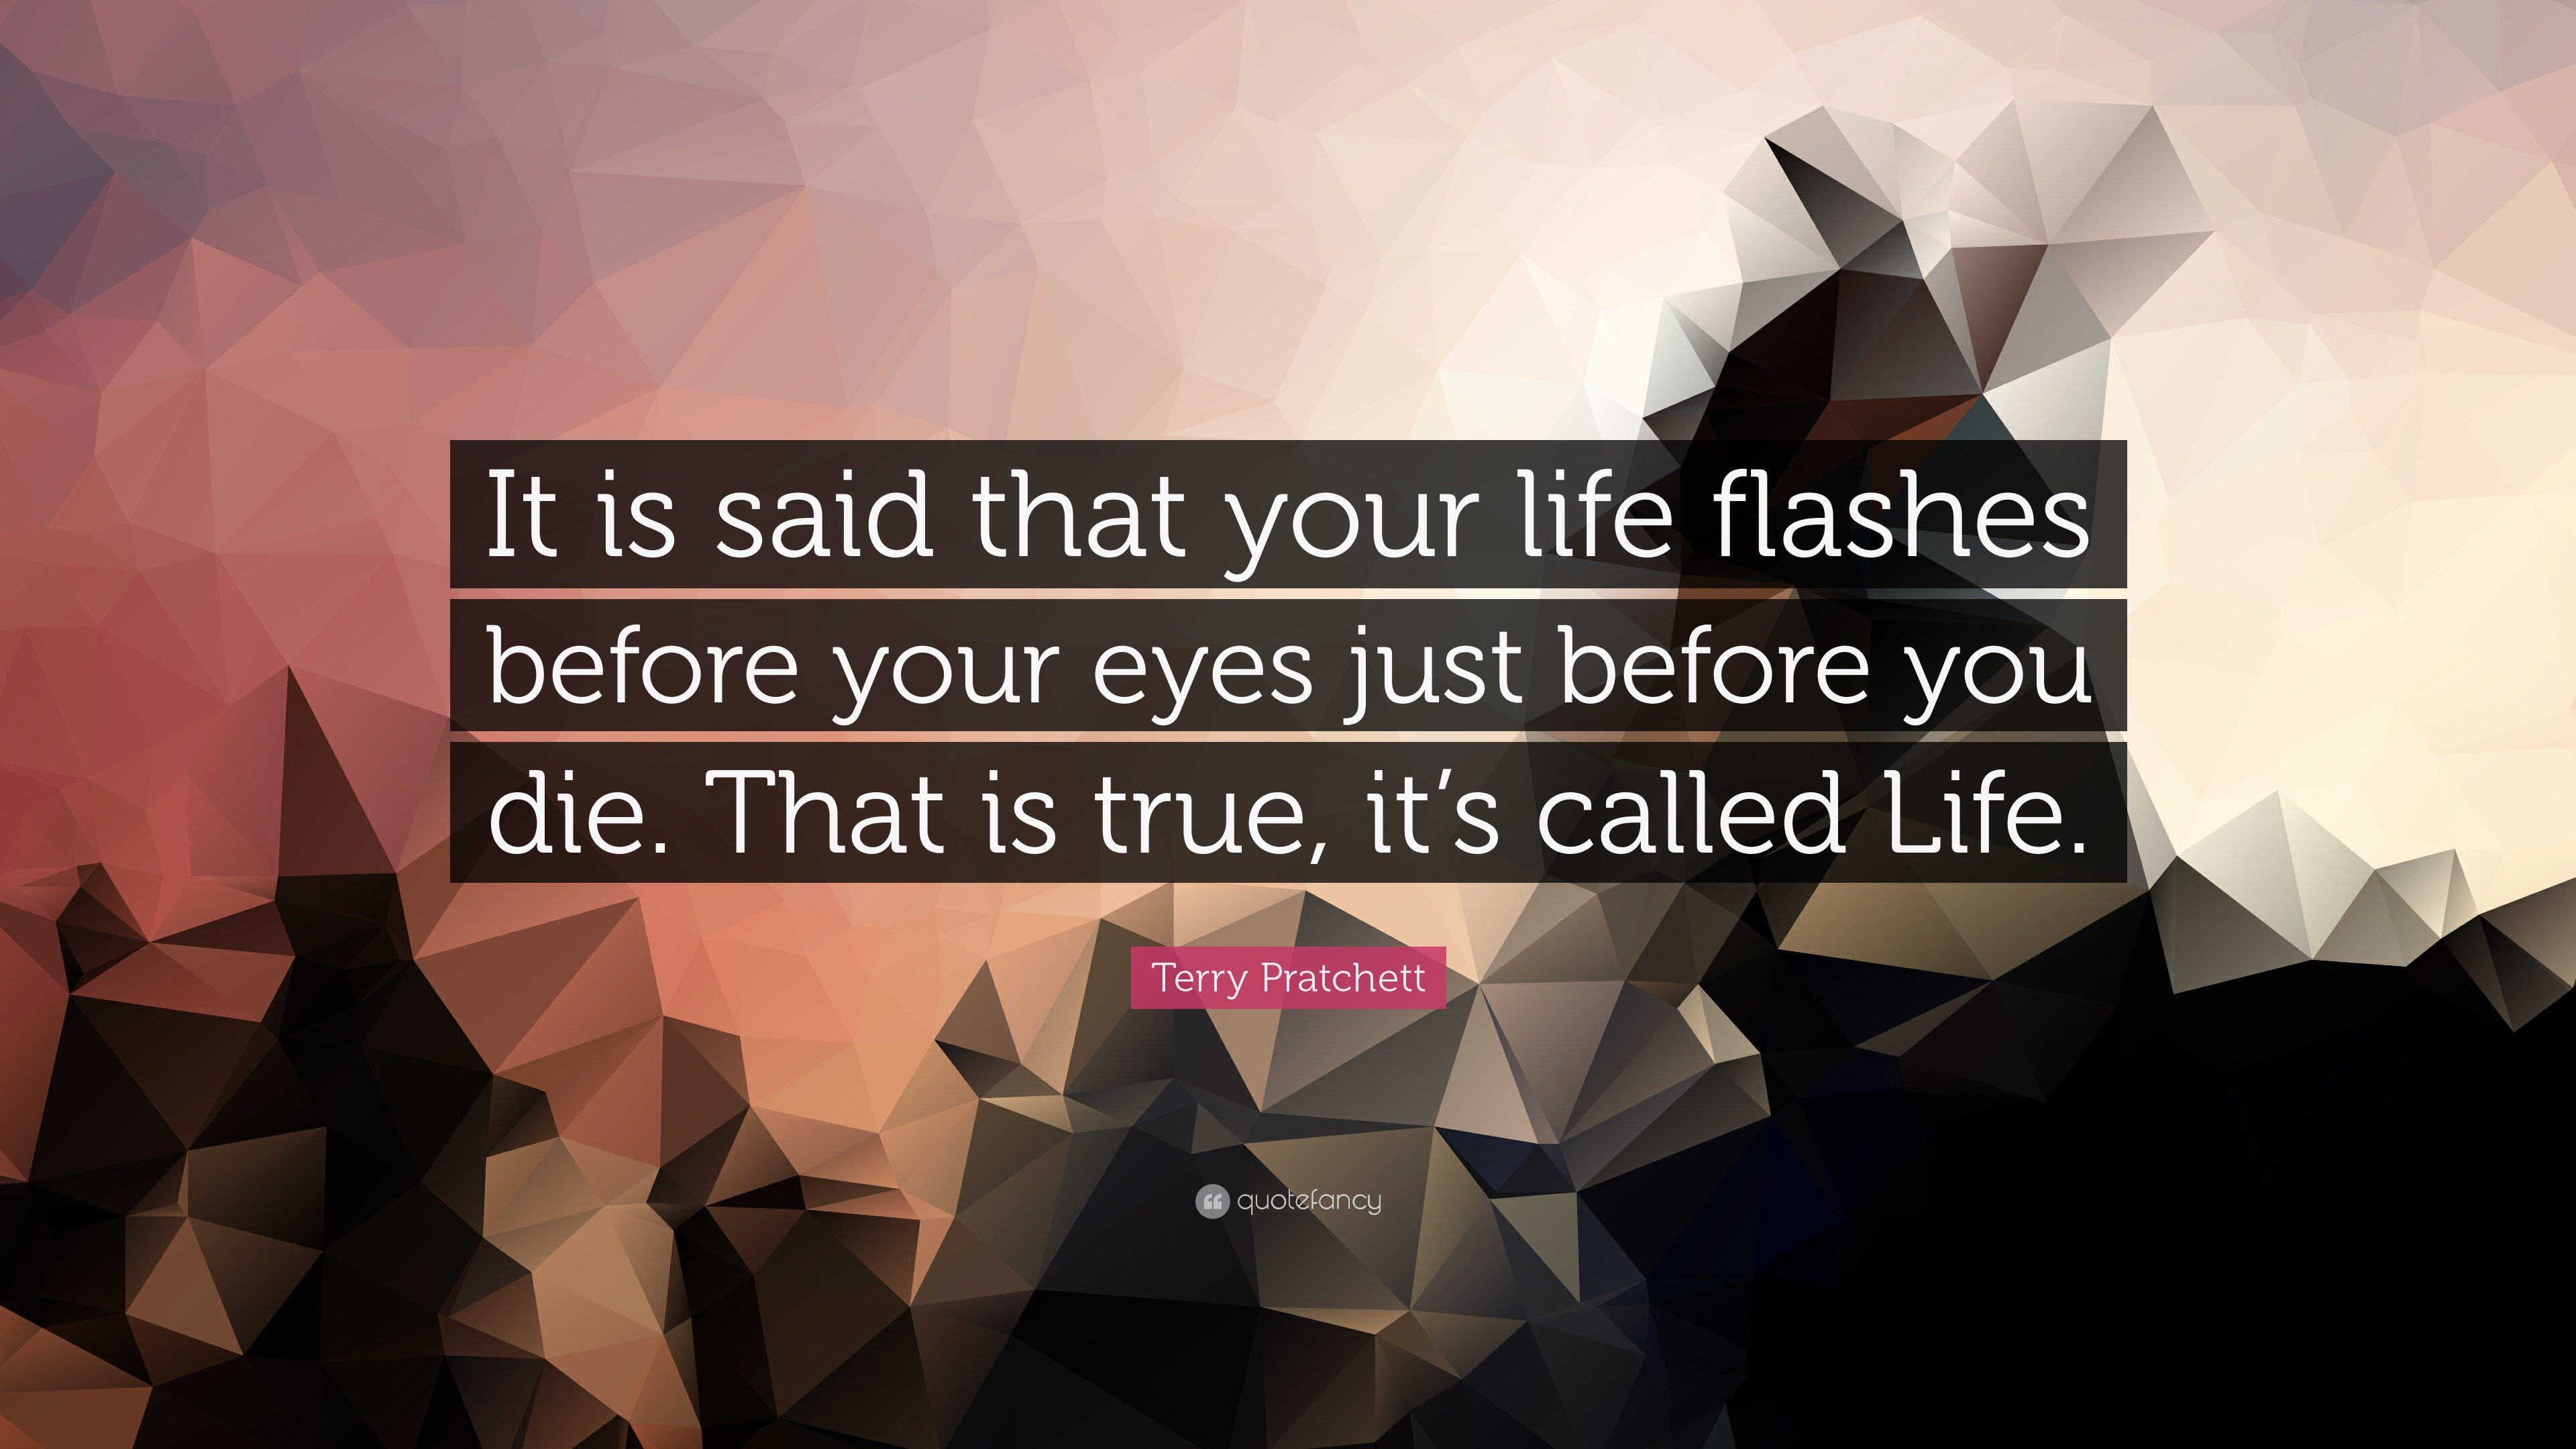 Terry Pratchett Quote: “It is said that your life flashes before your ...